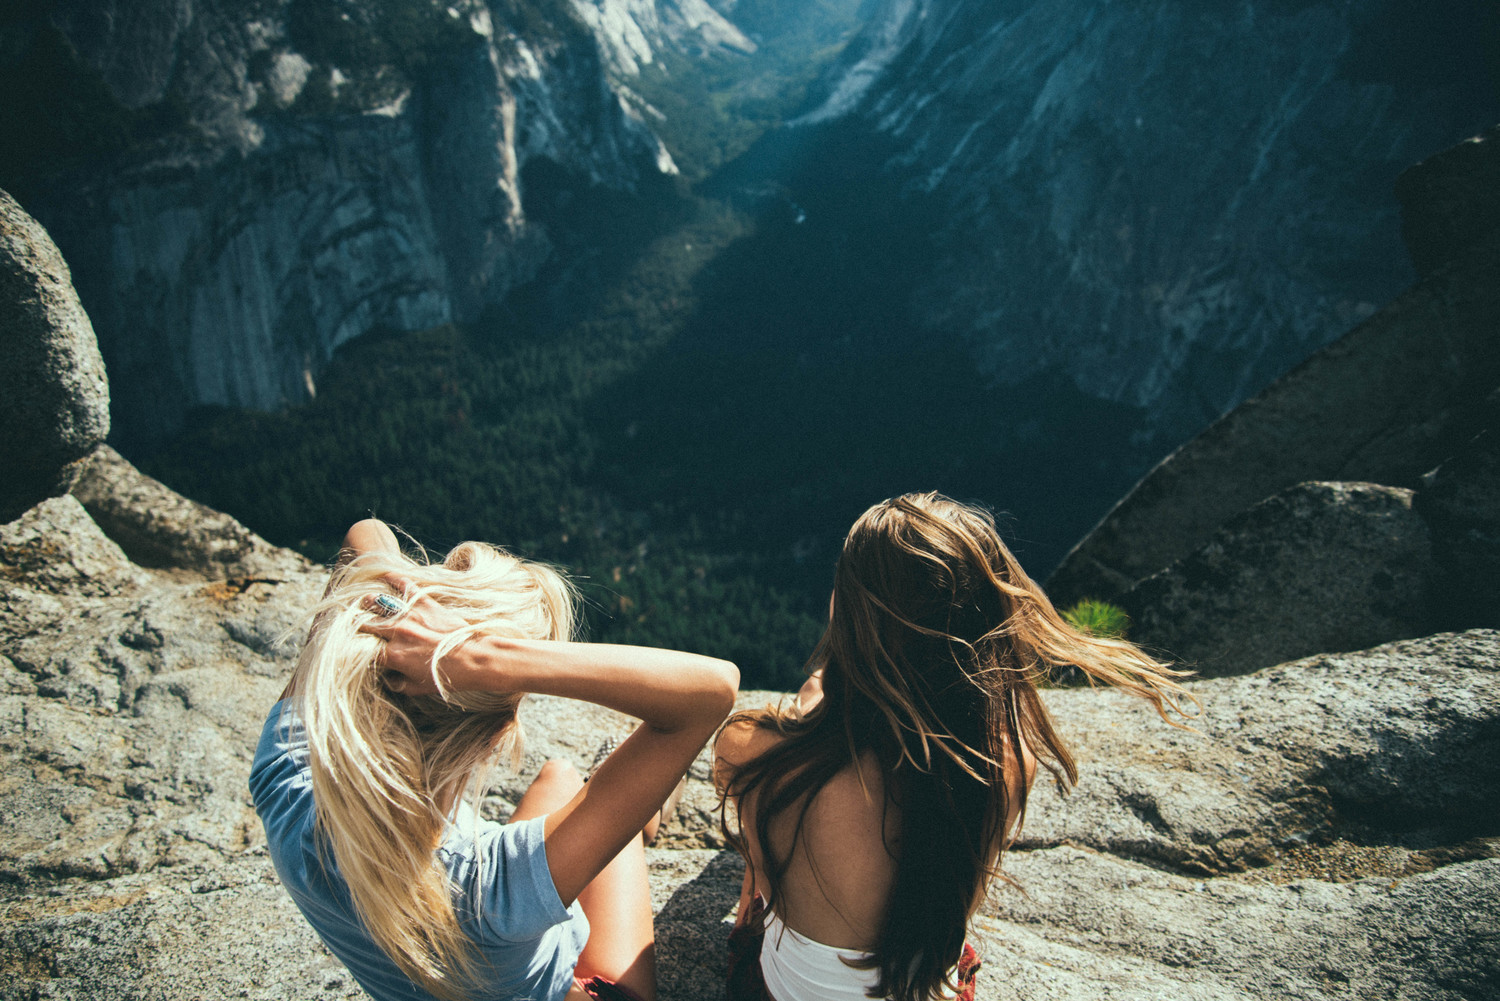 Women Women Outdoors Photography Noel Alvarenga Landscape Mountains Hands On Head Chill Out Model Lo 1500x1001